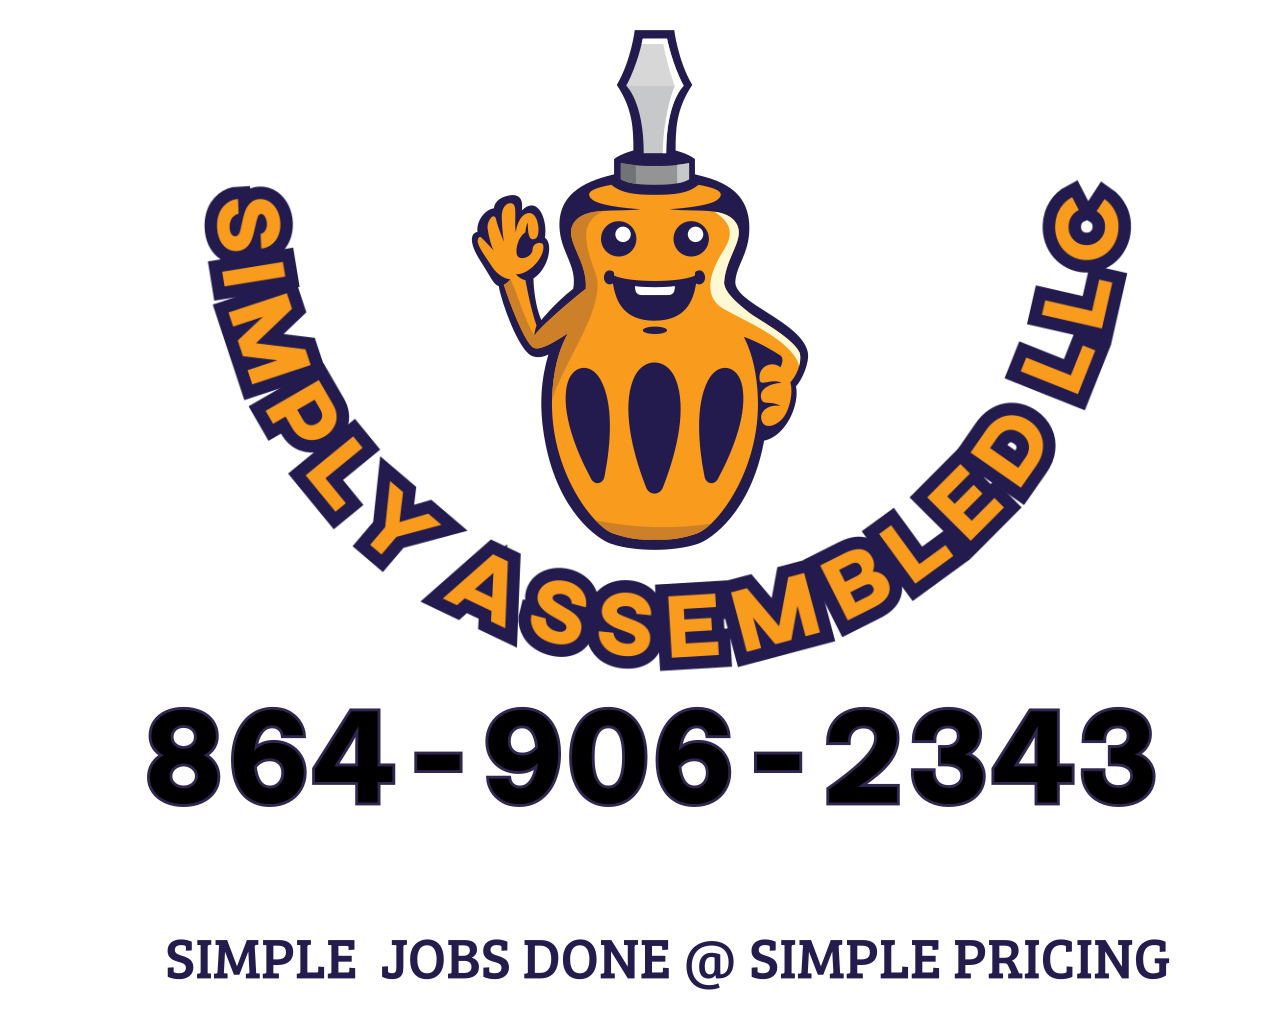 Simple Assembly Logo